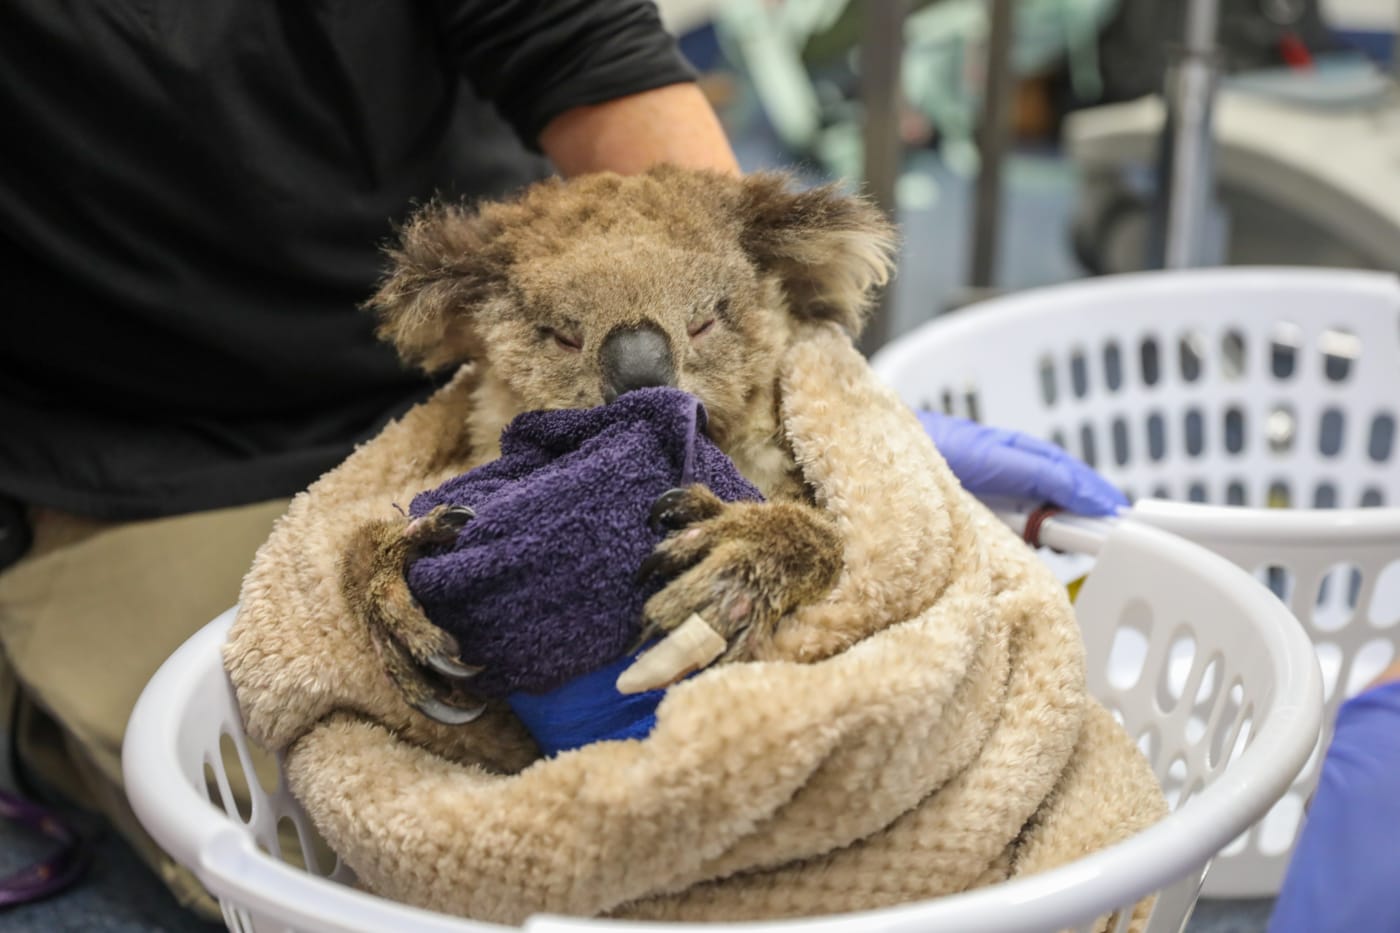 Annie the koala is wrapped in blankets after her bandage changing procedure. Annie was found near Mallacoota, suffering from burns to her paws. She was treated at the Mallacoota triage centre and flown back to Melbourne Zoo where she has been recovering and receiving treatment.